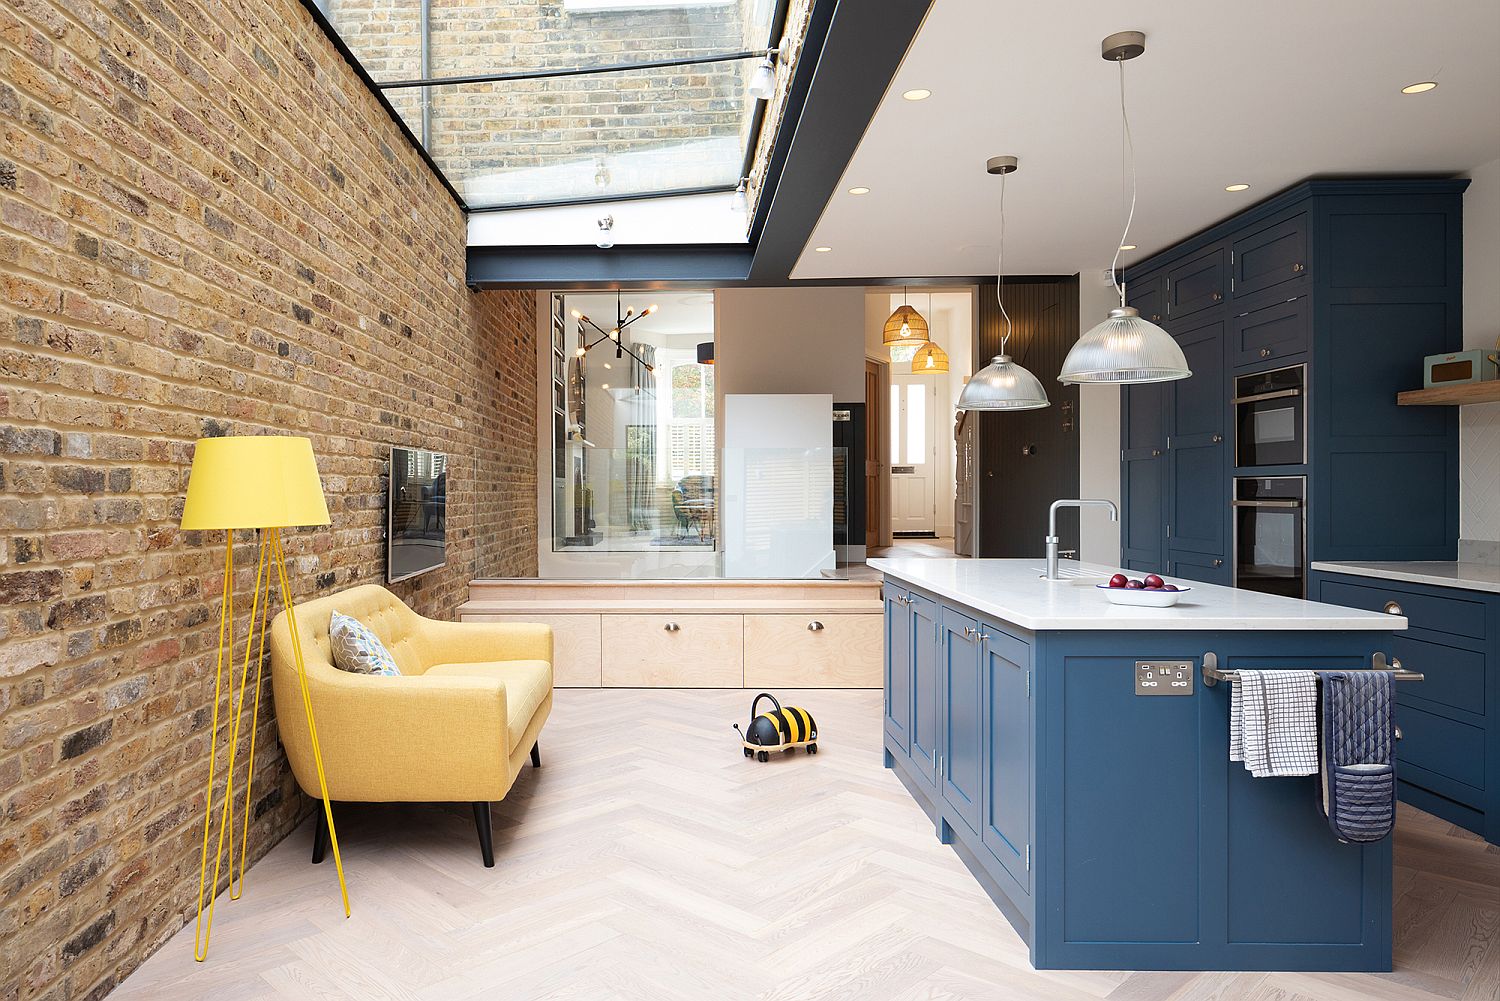 Fantastic-kitchen-area-and-social-zone-of-London-home-with-skylight-and-brick-wall